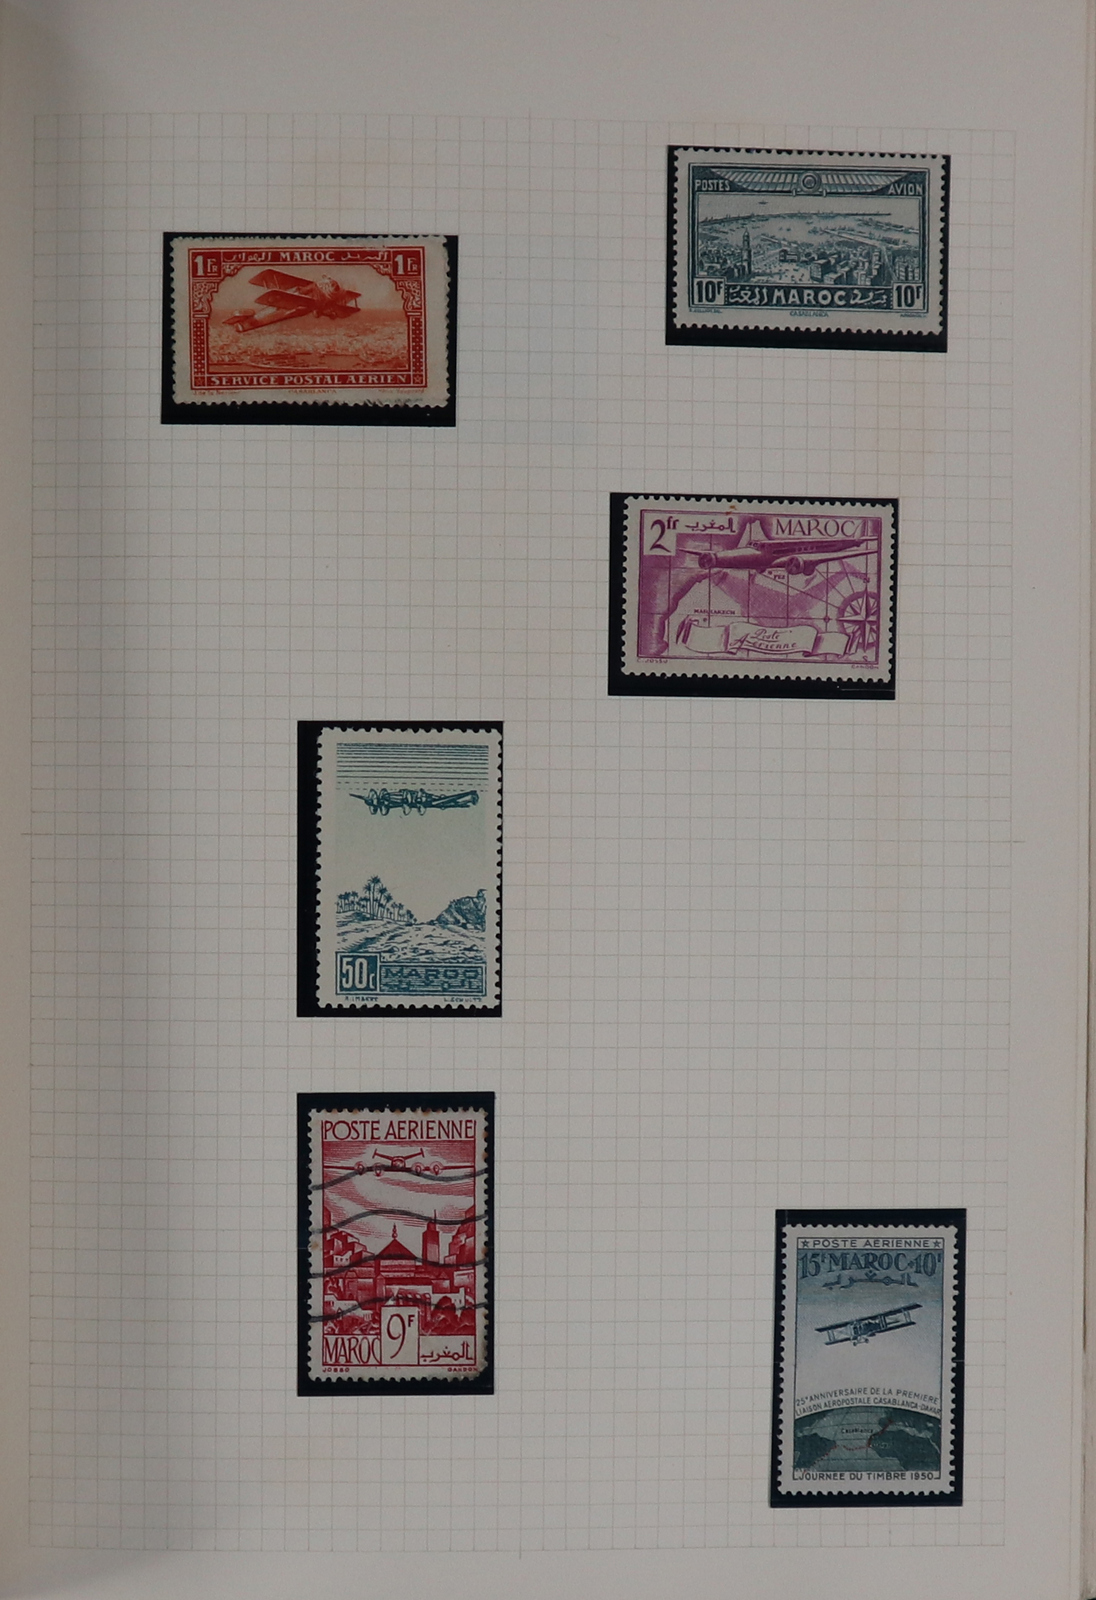 5 General World Collection Stamp Albums With 2 Boxes Of Unsorted Stamps And  A Stanley Gibbons Catalo Auction